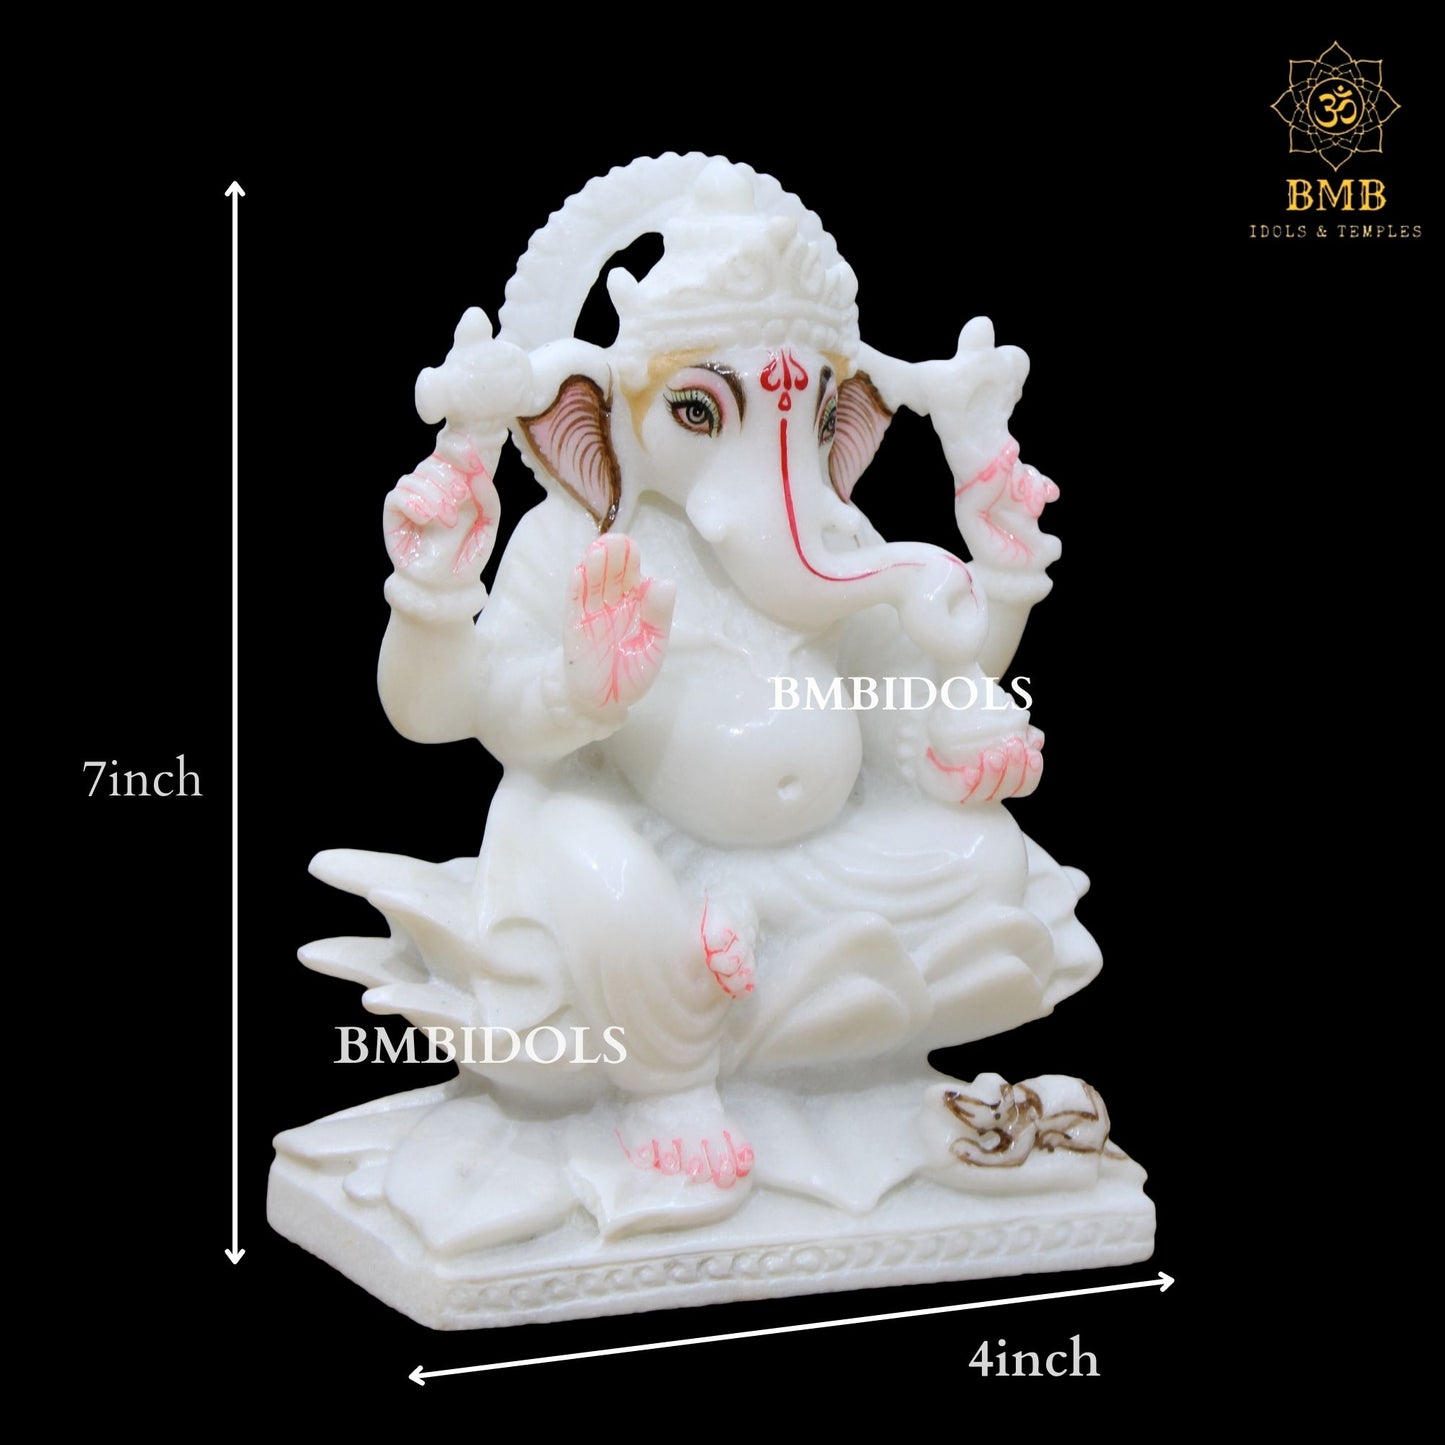 Marble Ganesh Lakshmi Saraswati Statue for Homes and Temple in White Marble